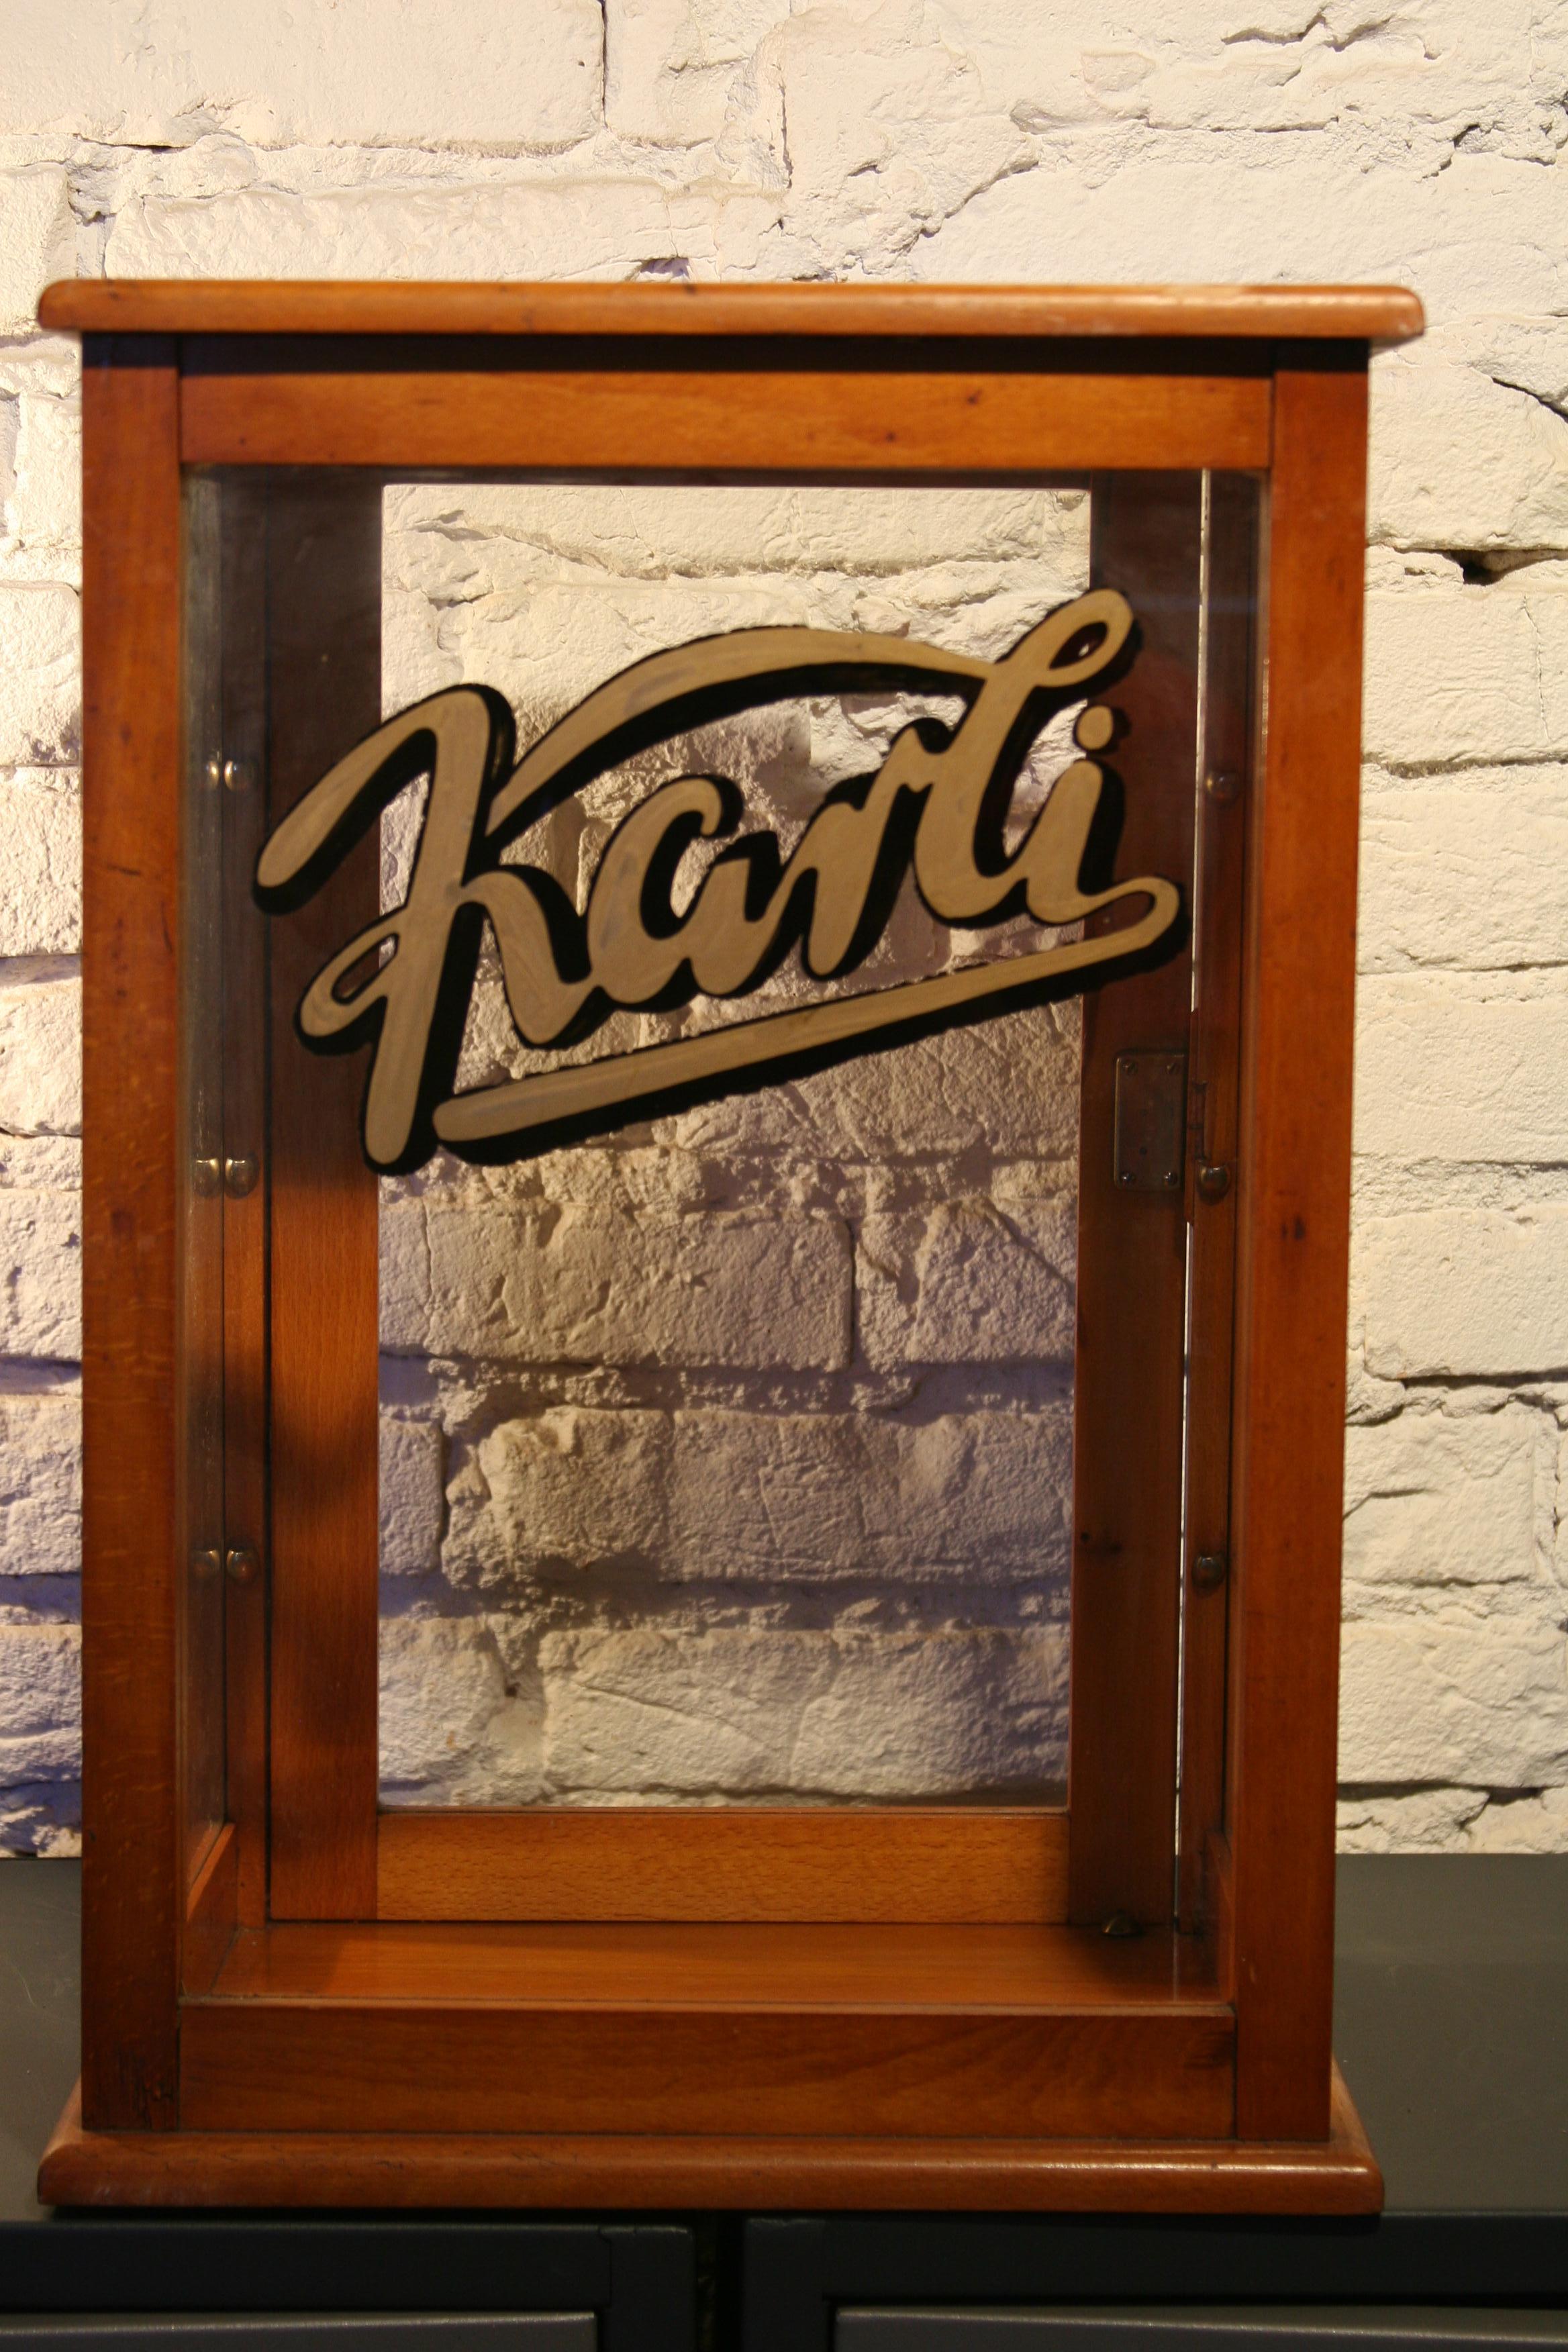 Original German glass cage.
Construction:
The frame is made of solid wood, the door opens at the rear, inside there are three glass shelves mounted on brass handles. On the windshield, original Karli Company advertisement painted in gold and